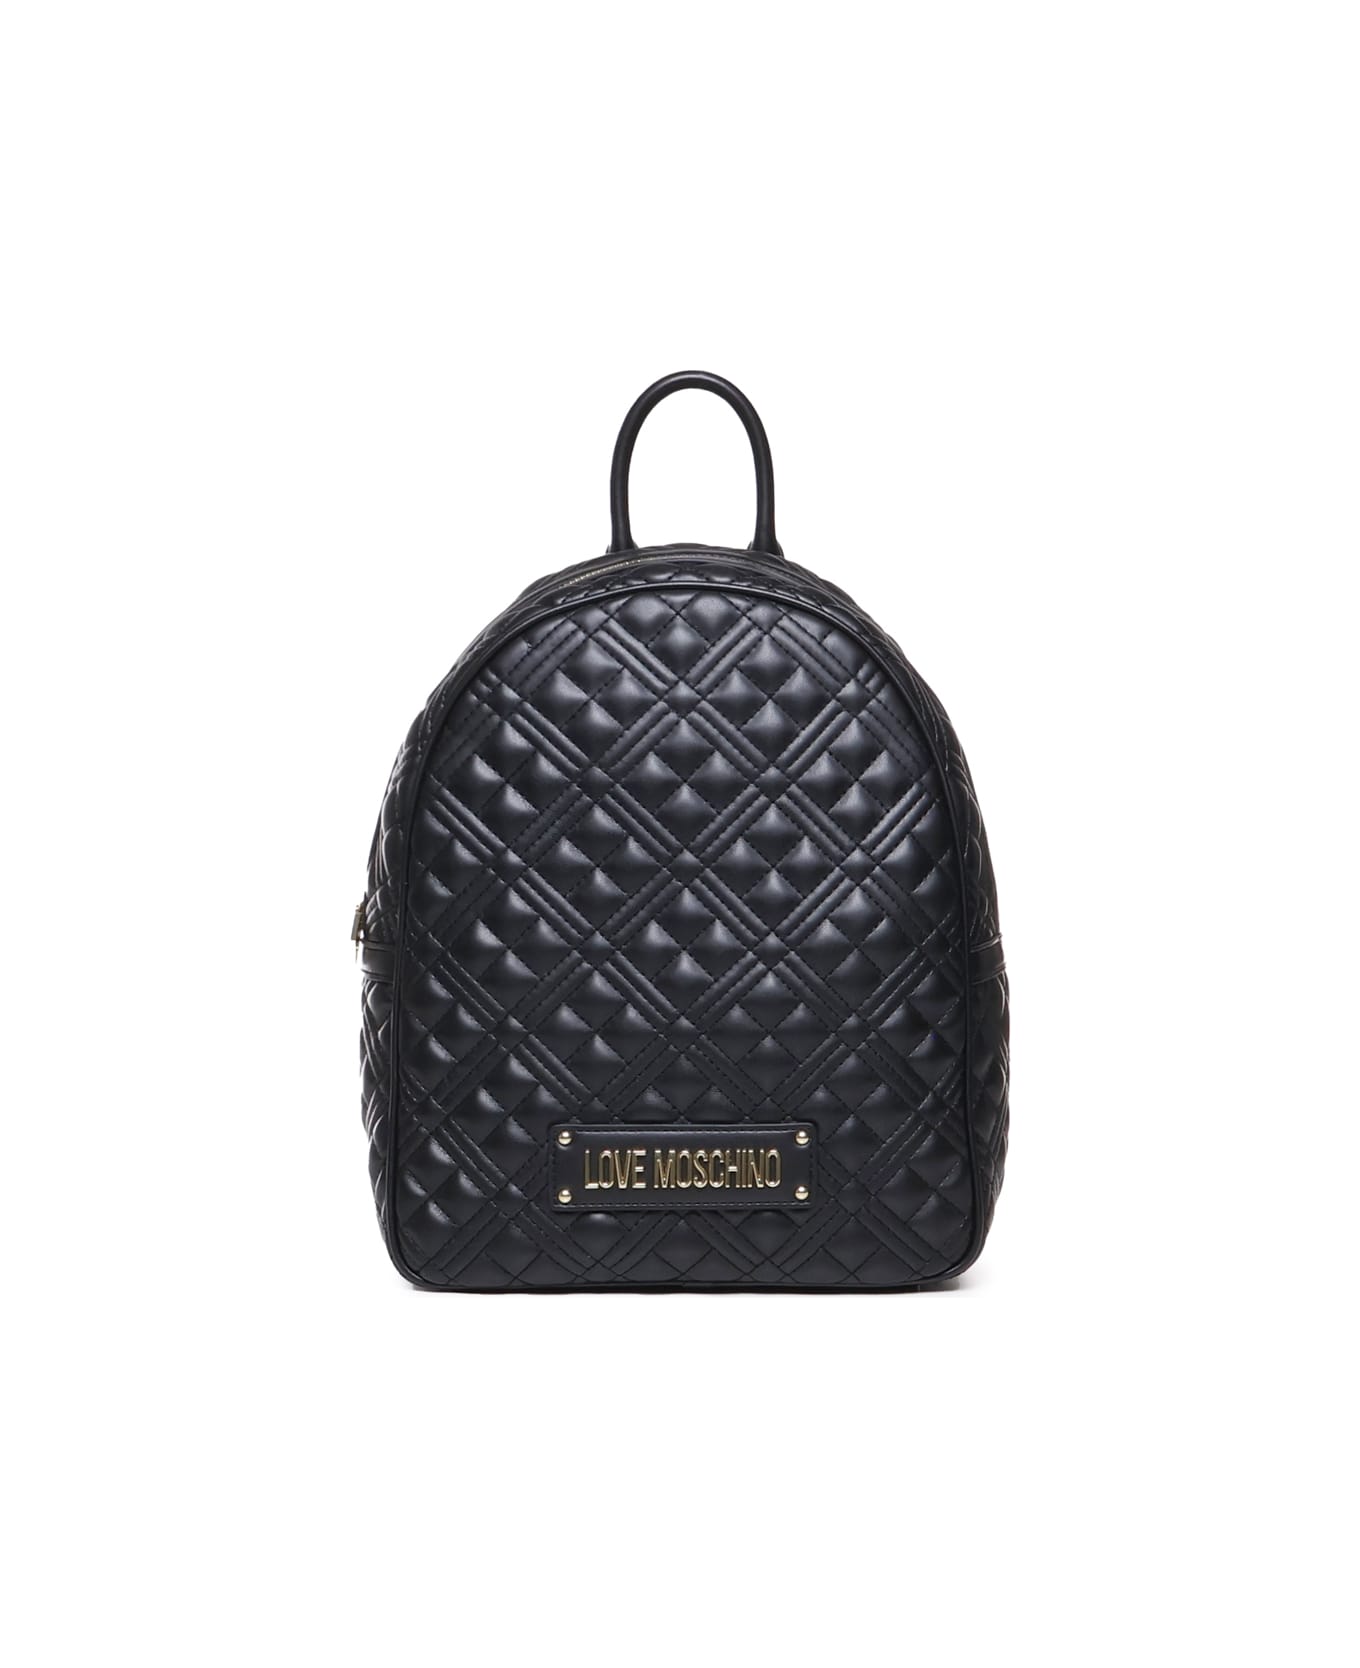 Love Moschino Quilted Backpack With Logo - Black